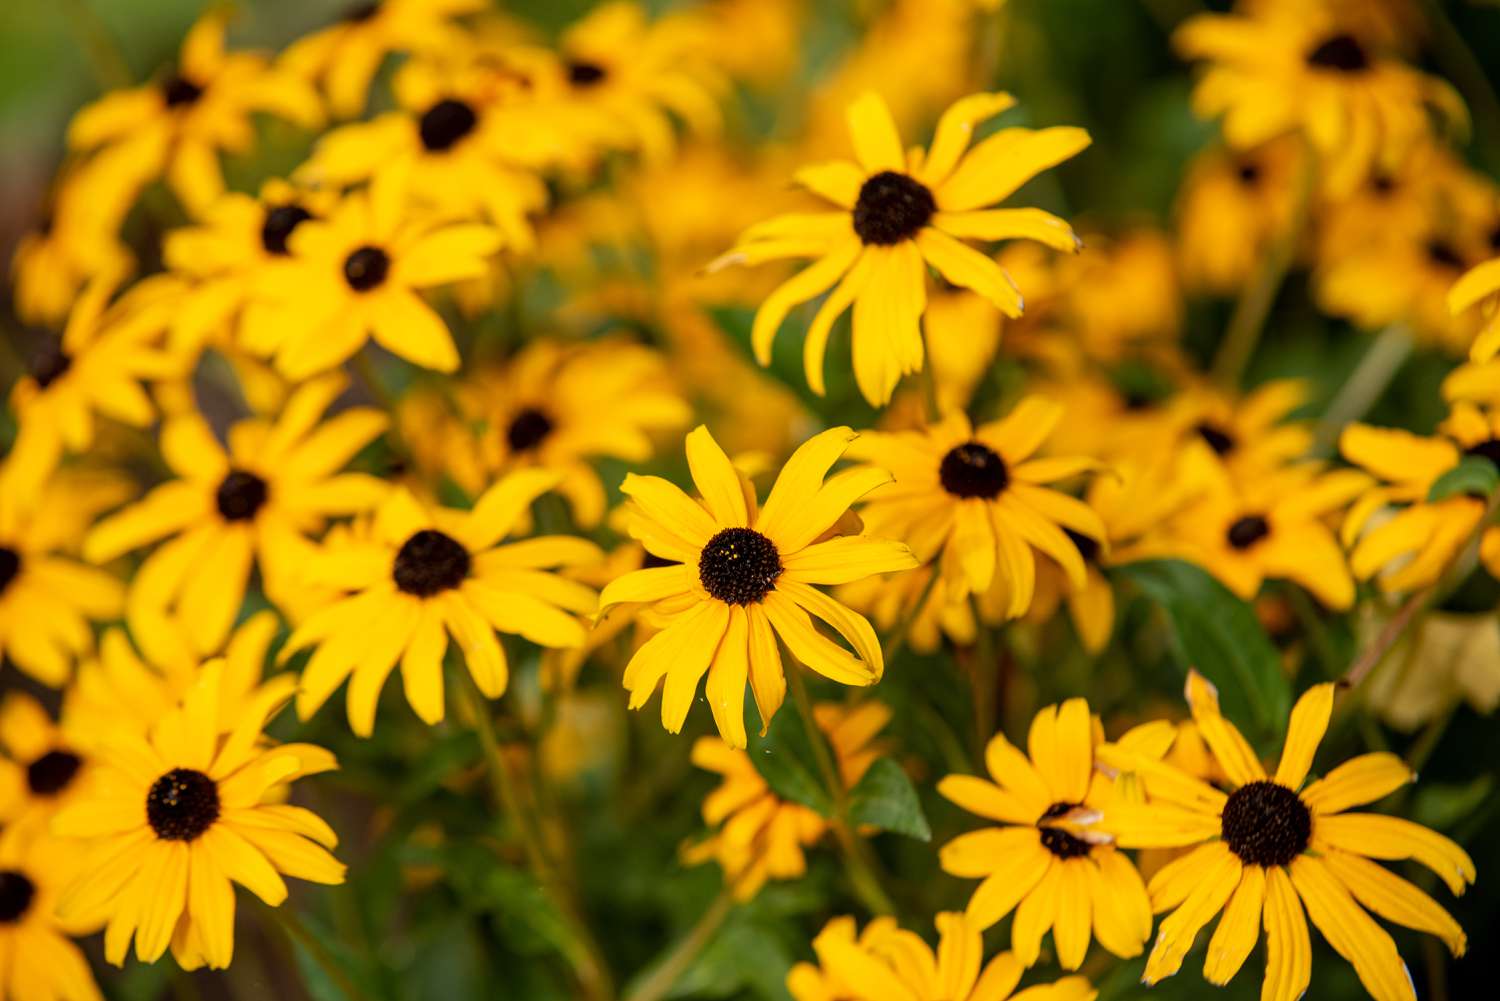 Black-eyed Susan flowers with radiating yellow petals with brown button centers